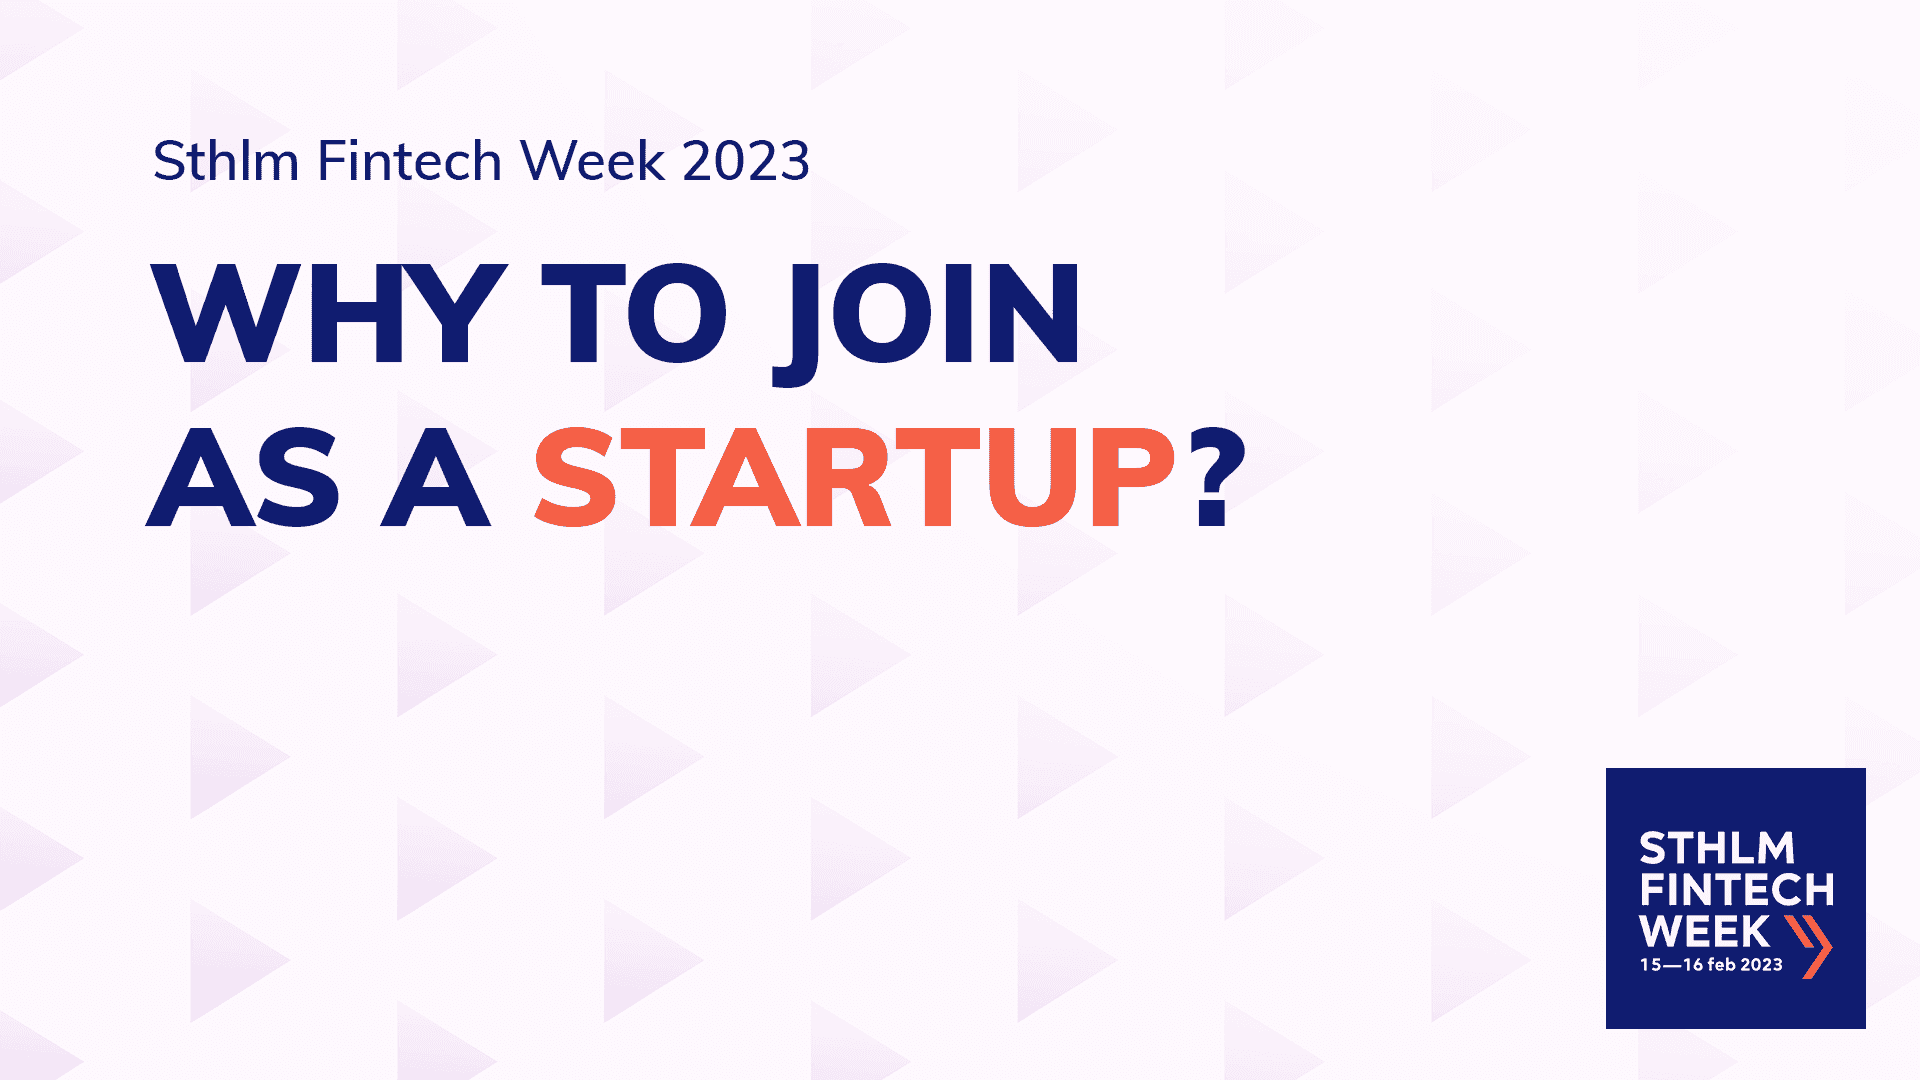 How to join as a Startup